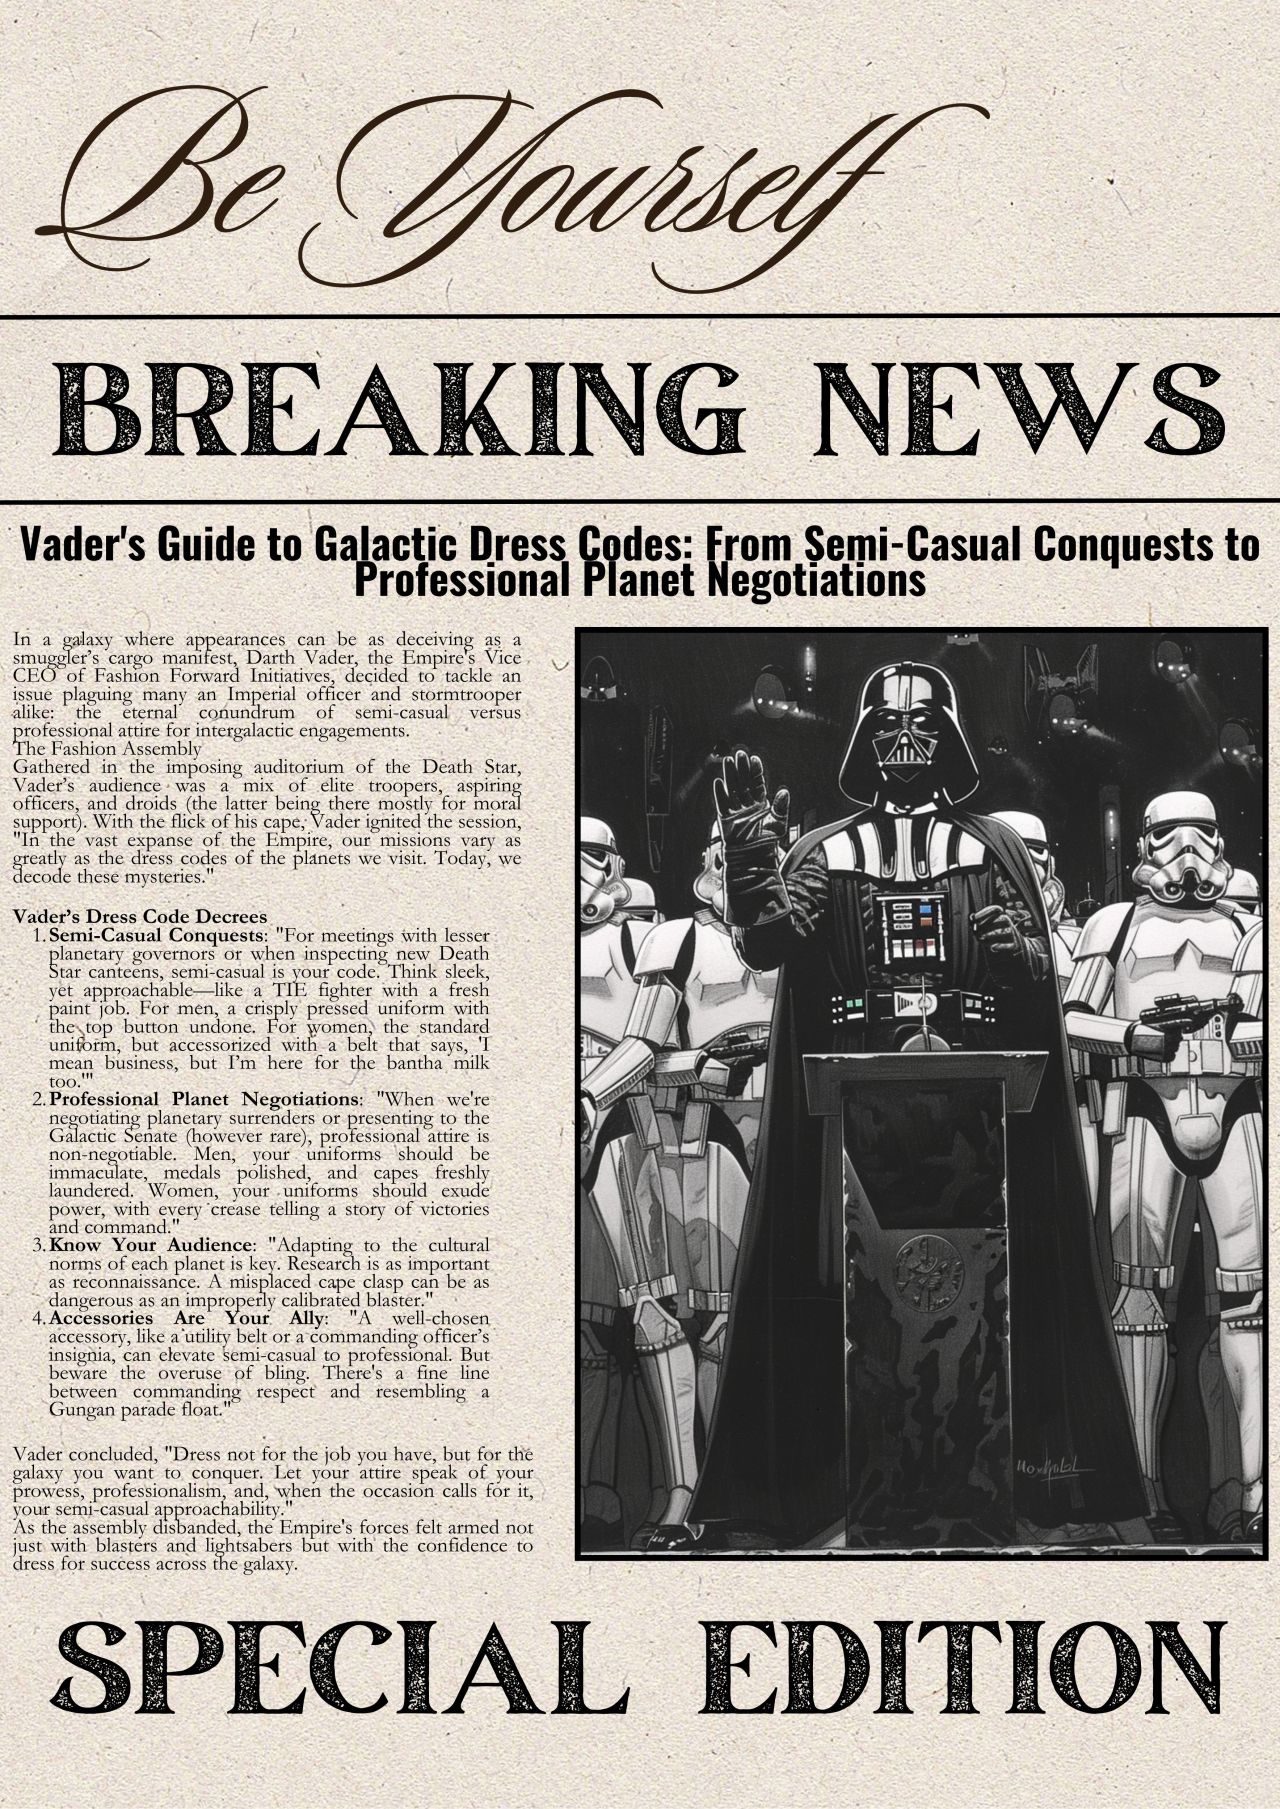 Vader's Guide to Galactic Dress Codes: From Semi-Casual Conquests to Professional Planet Negotiations